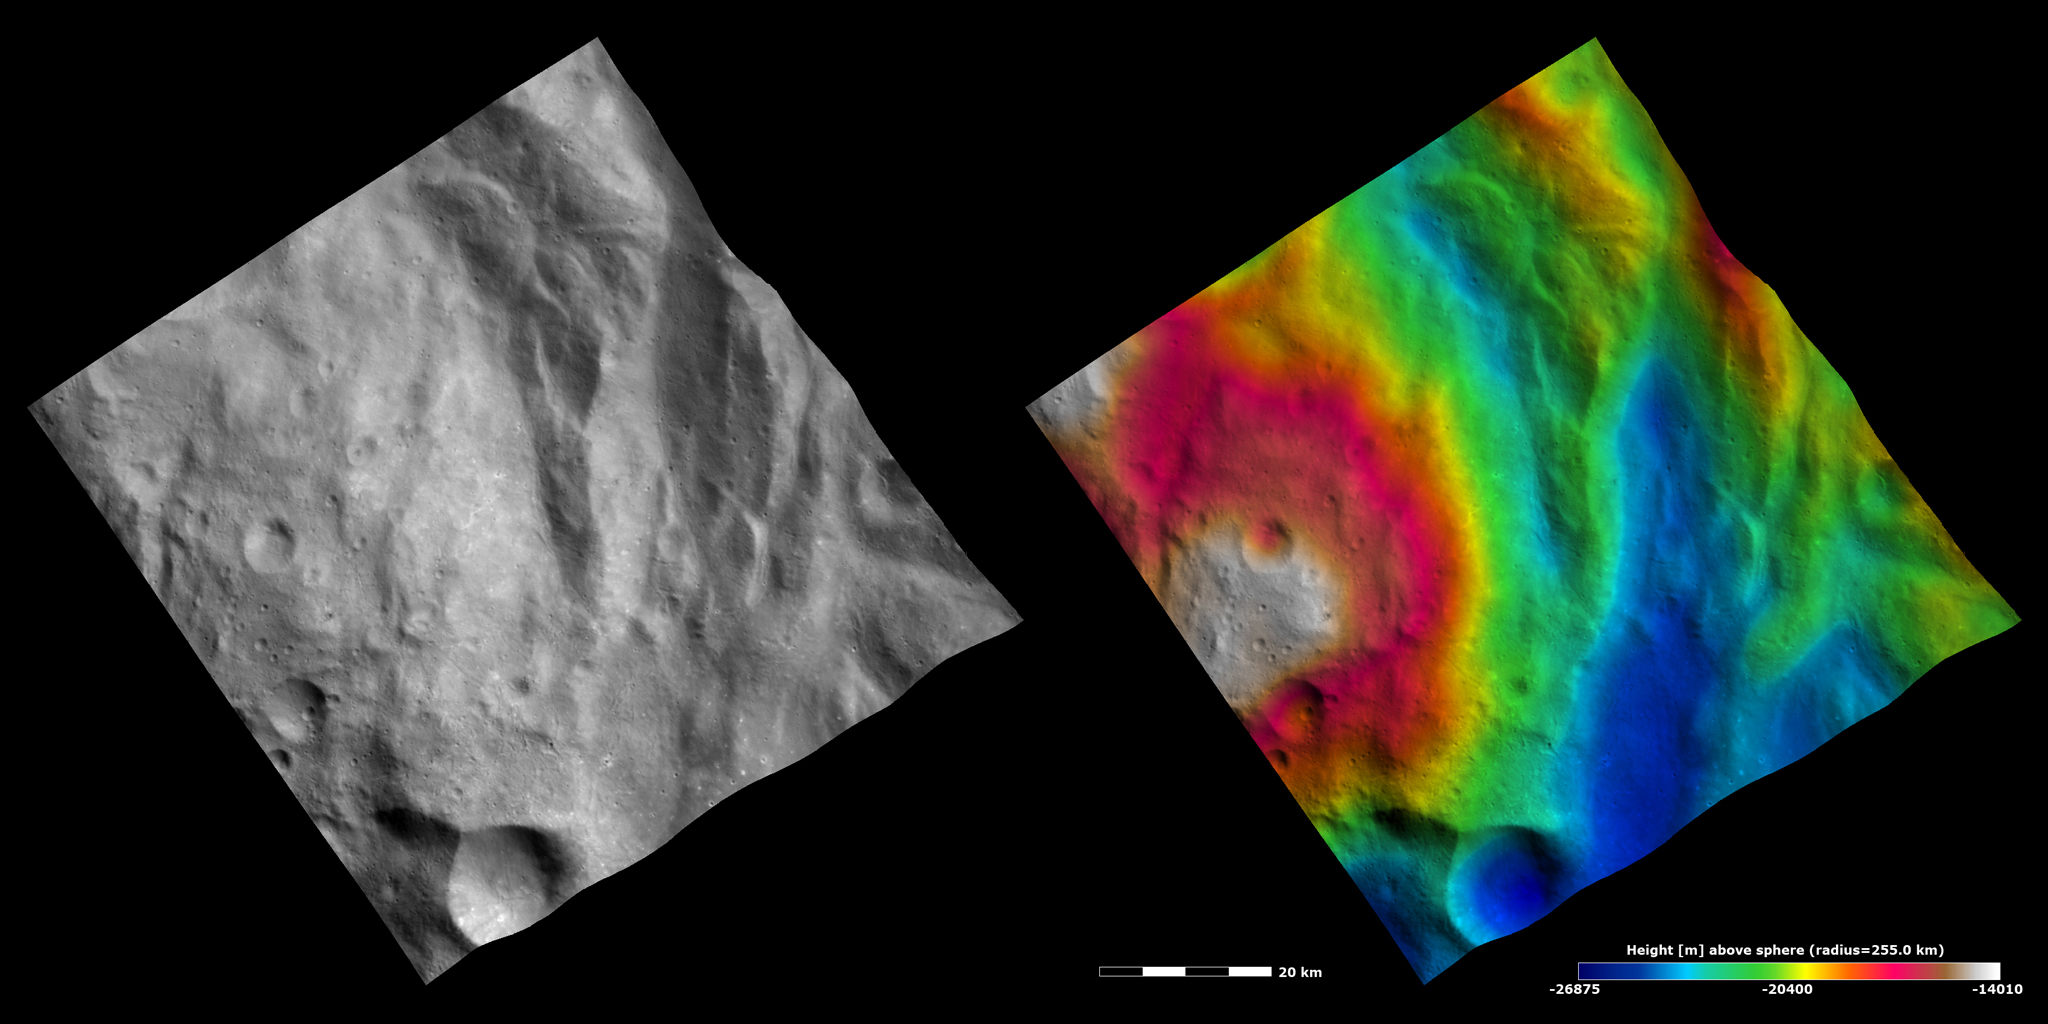 Topography and Albedo Image of Central Complex and Hummocky Terrain